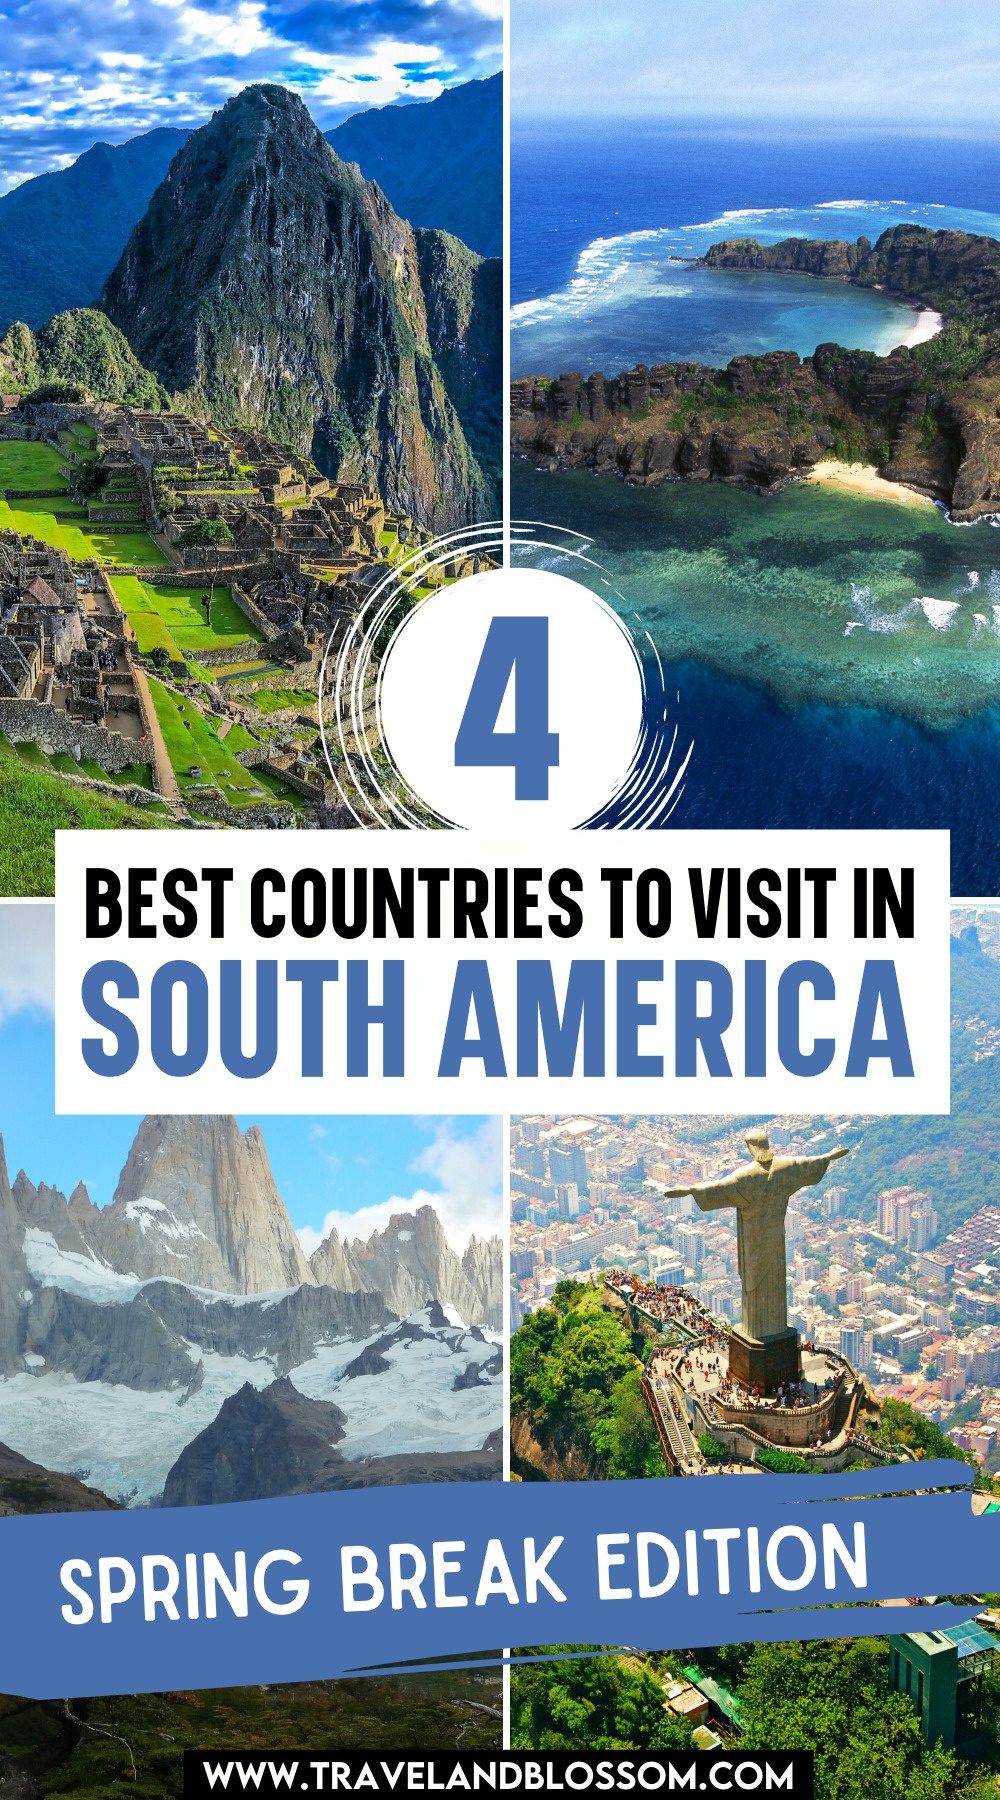 The Best Countries to Visit in South America for Spring Break